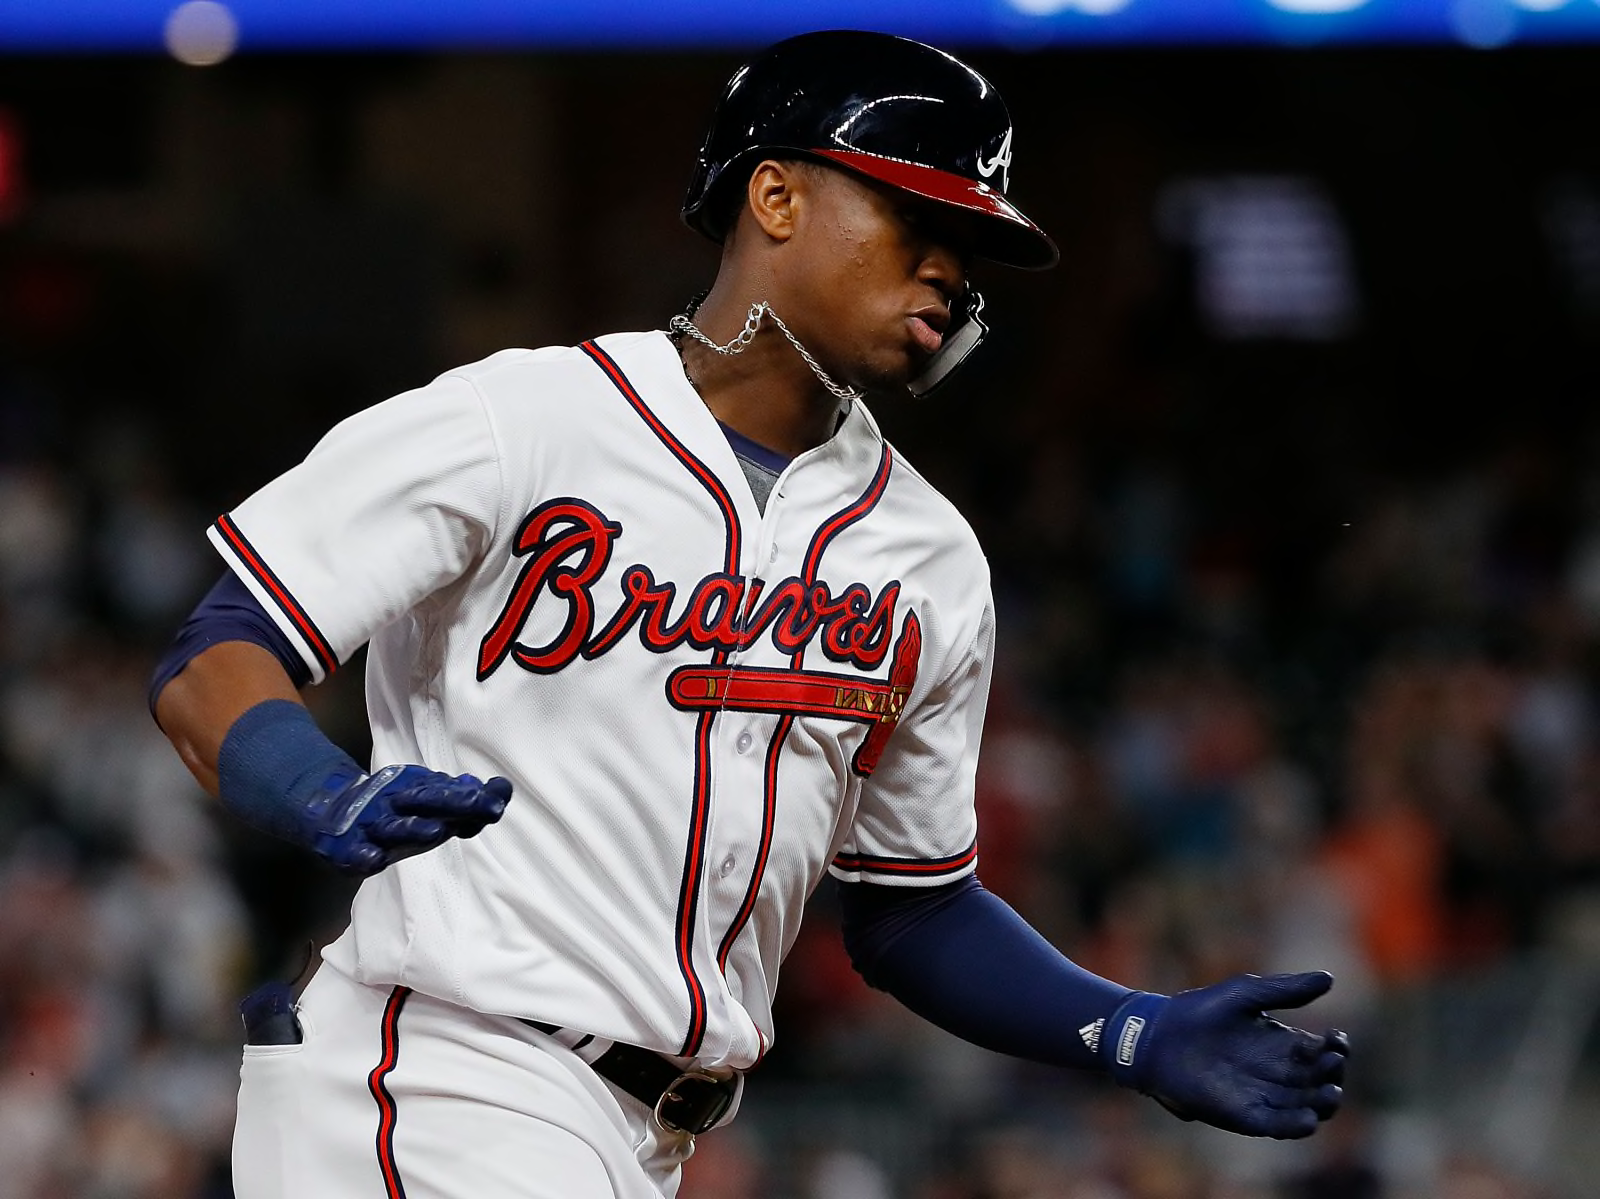 Ronald Acuna The Next National League Rookie of the Year